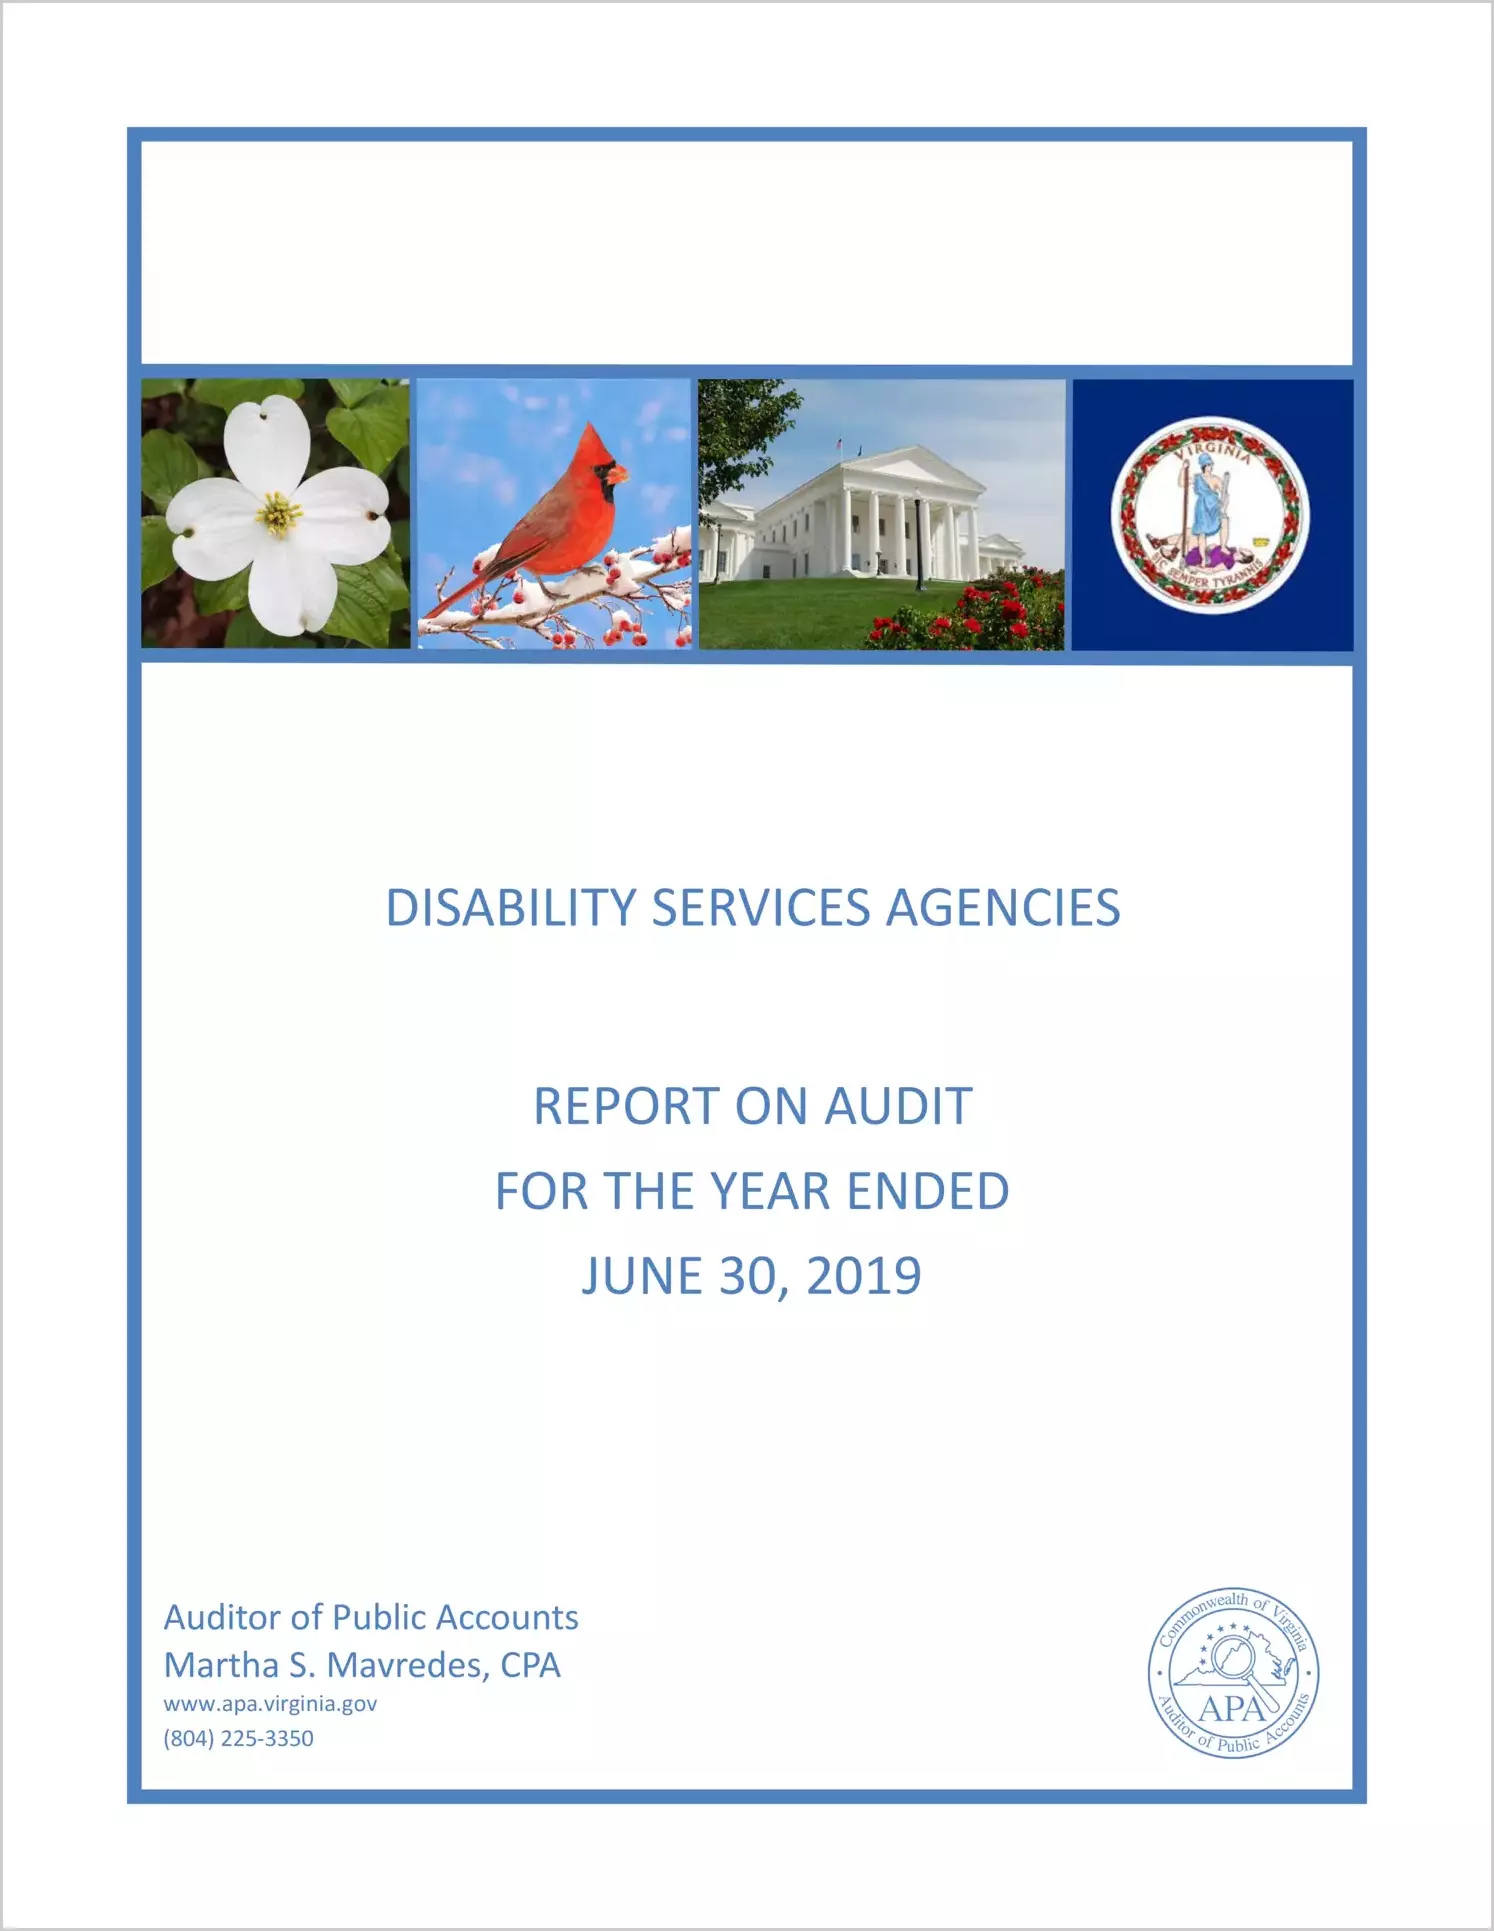 Disability Services Agencies for the year ended June 30, 2019